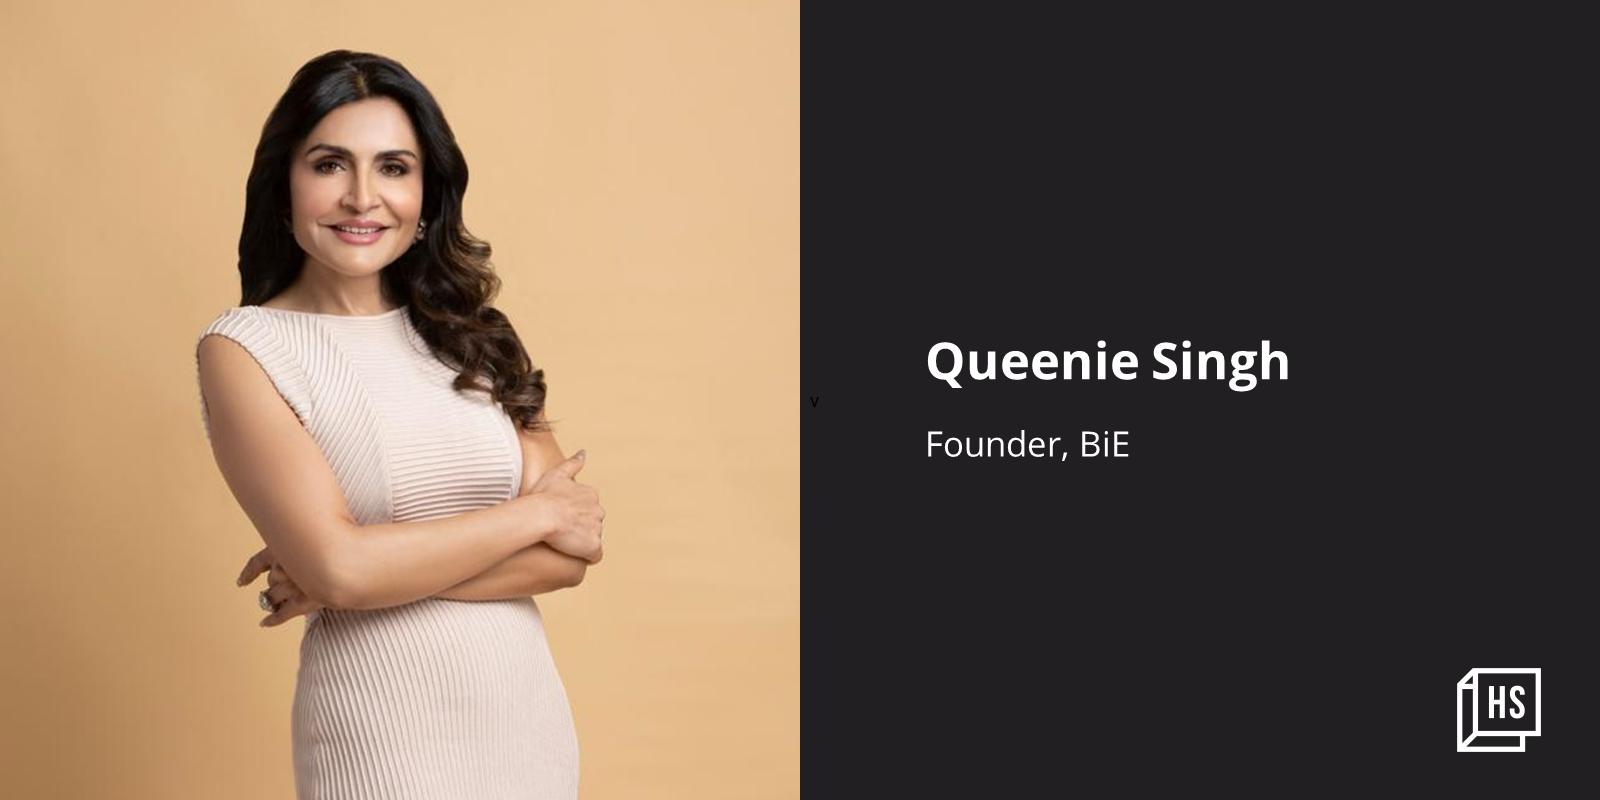 Former Miss India Queenie Singh blends passion for entrepreneurship and beauty

